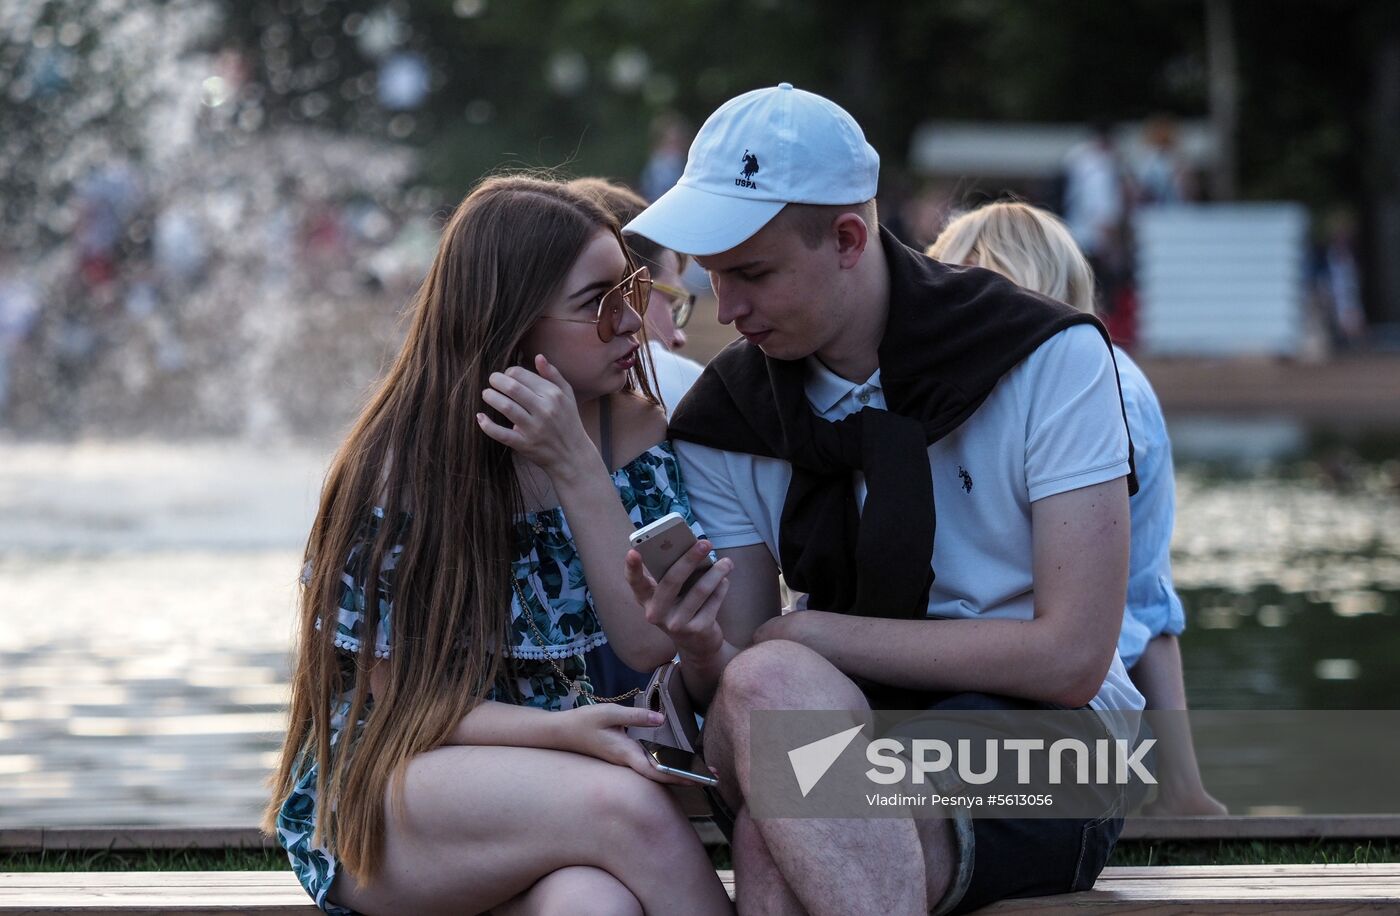 Summertime fun in Moscow